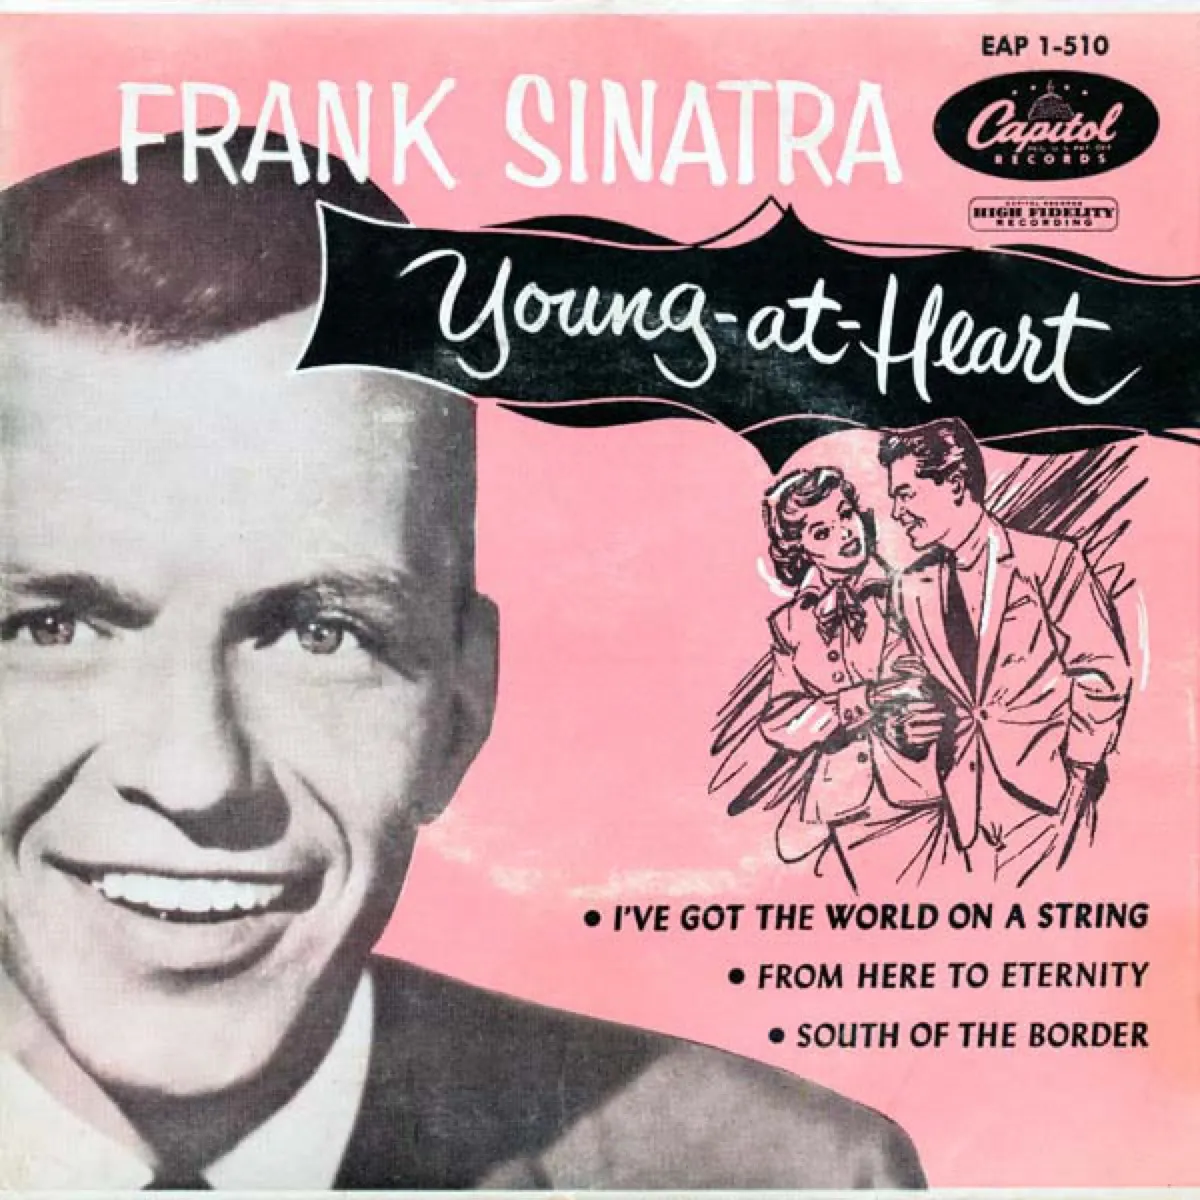 Frank Sinatra "Young-at-Heart" album cover